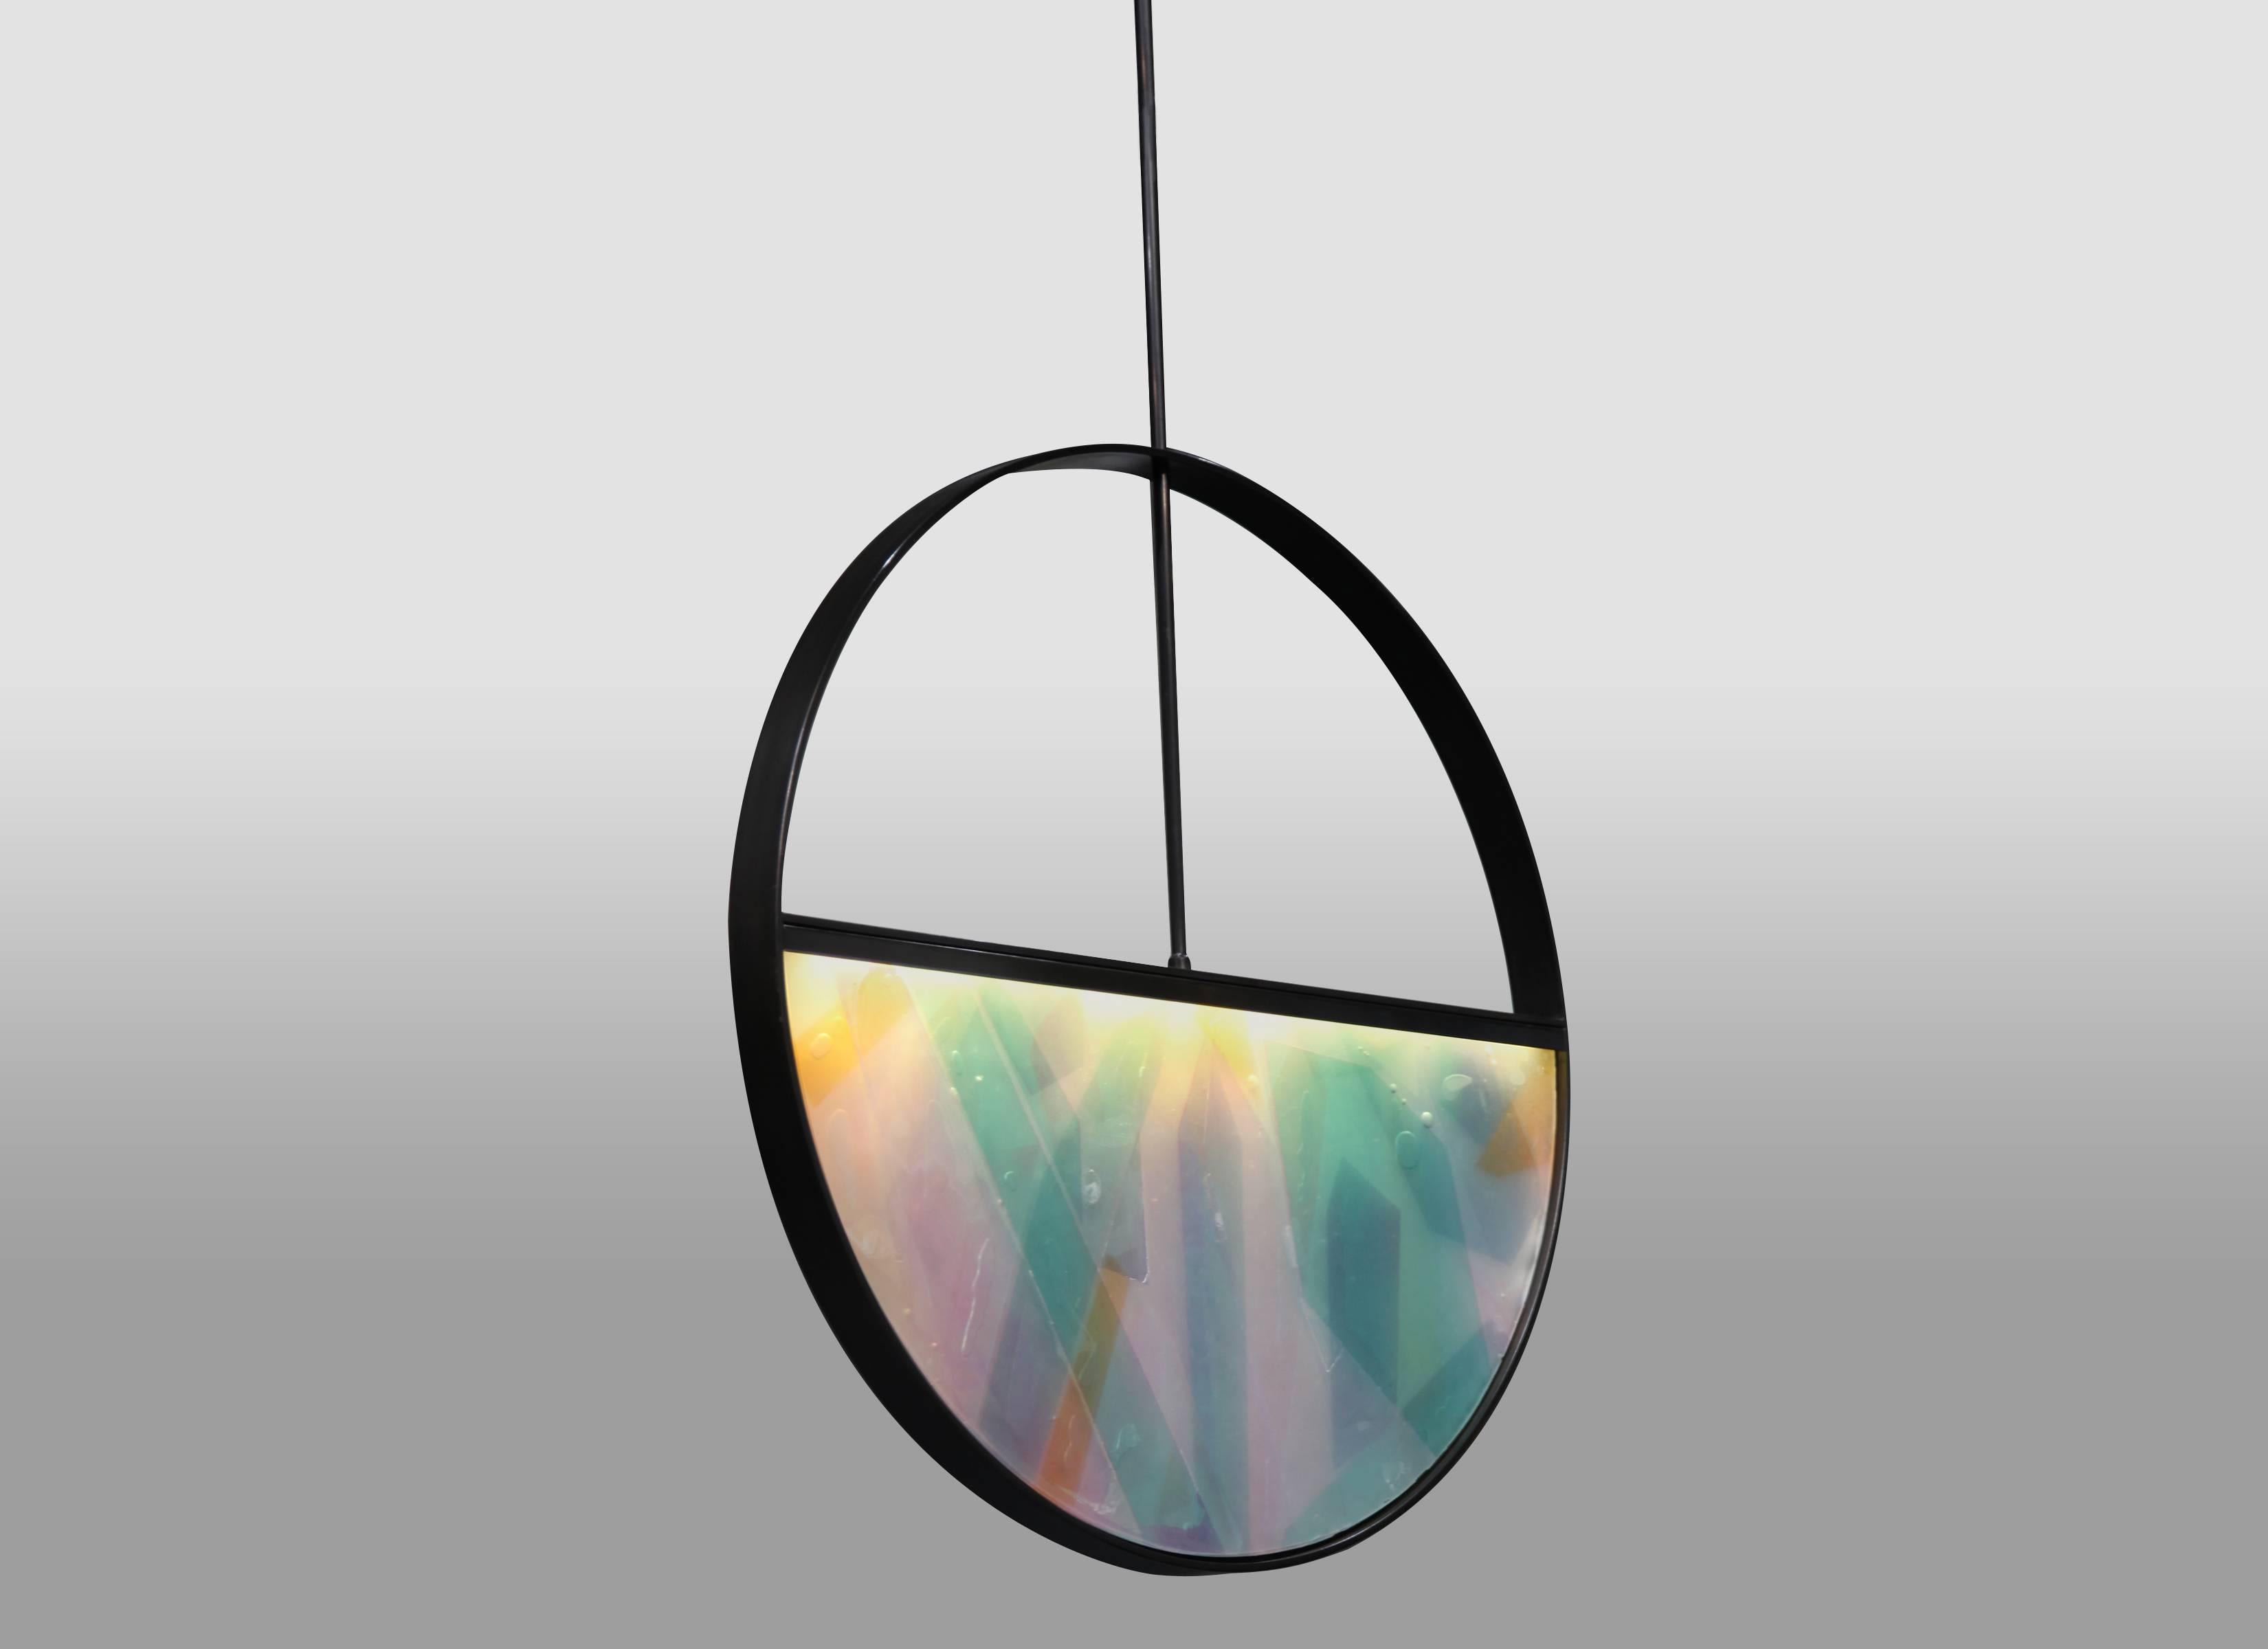 The Phase Pendant began with a collaborative investigation between Kin and Kim Markel — fellow Sight Unseen favorite — in which their native materials informed the iterative design process. They found beauty in layering acrylic, resin, and steel,